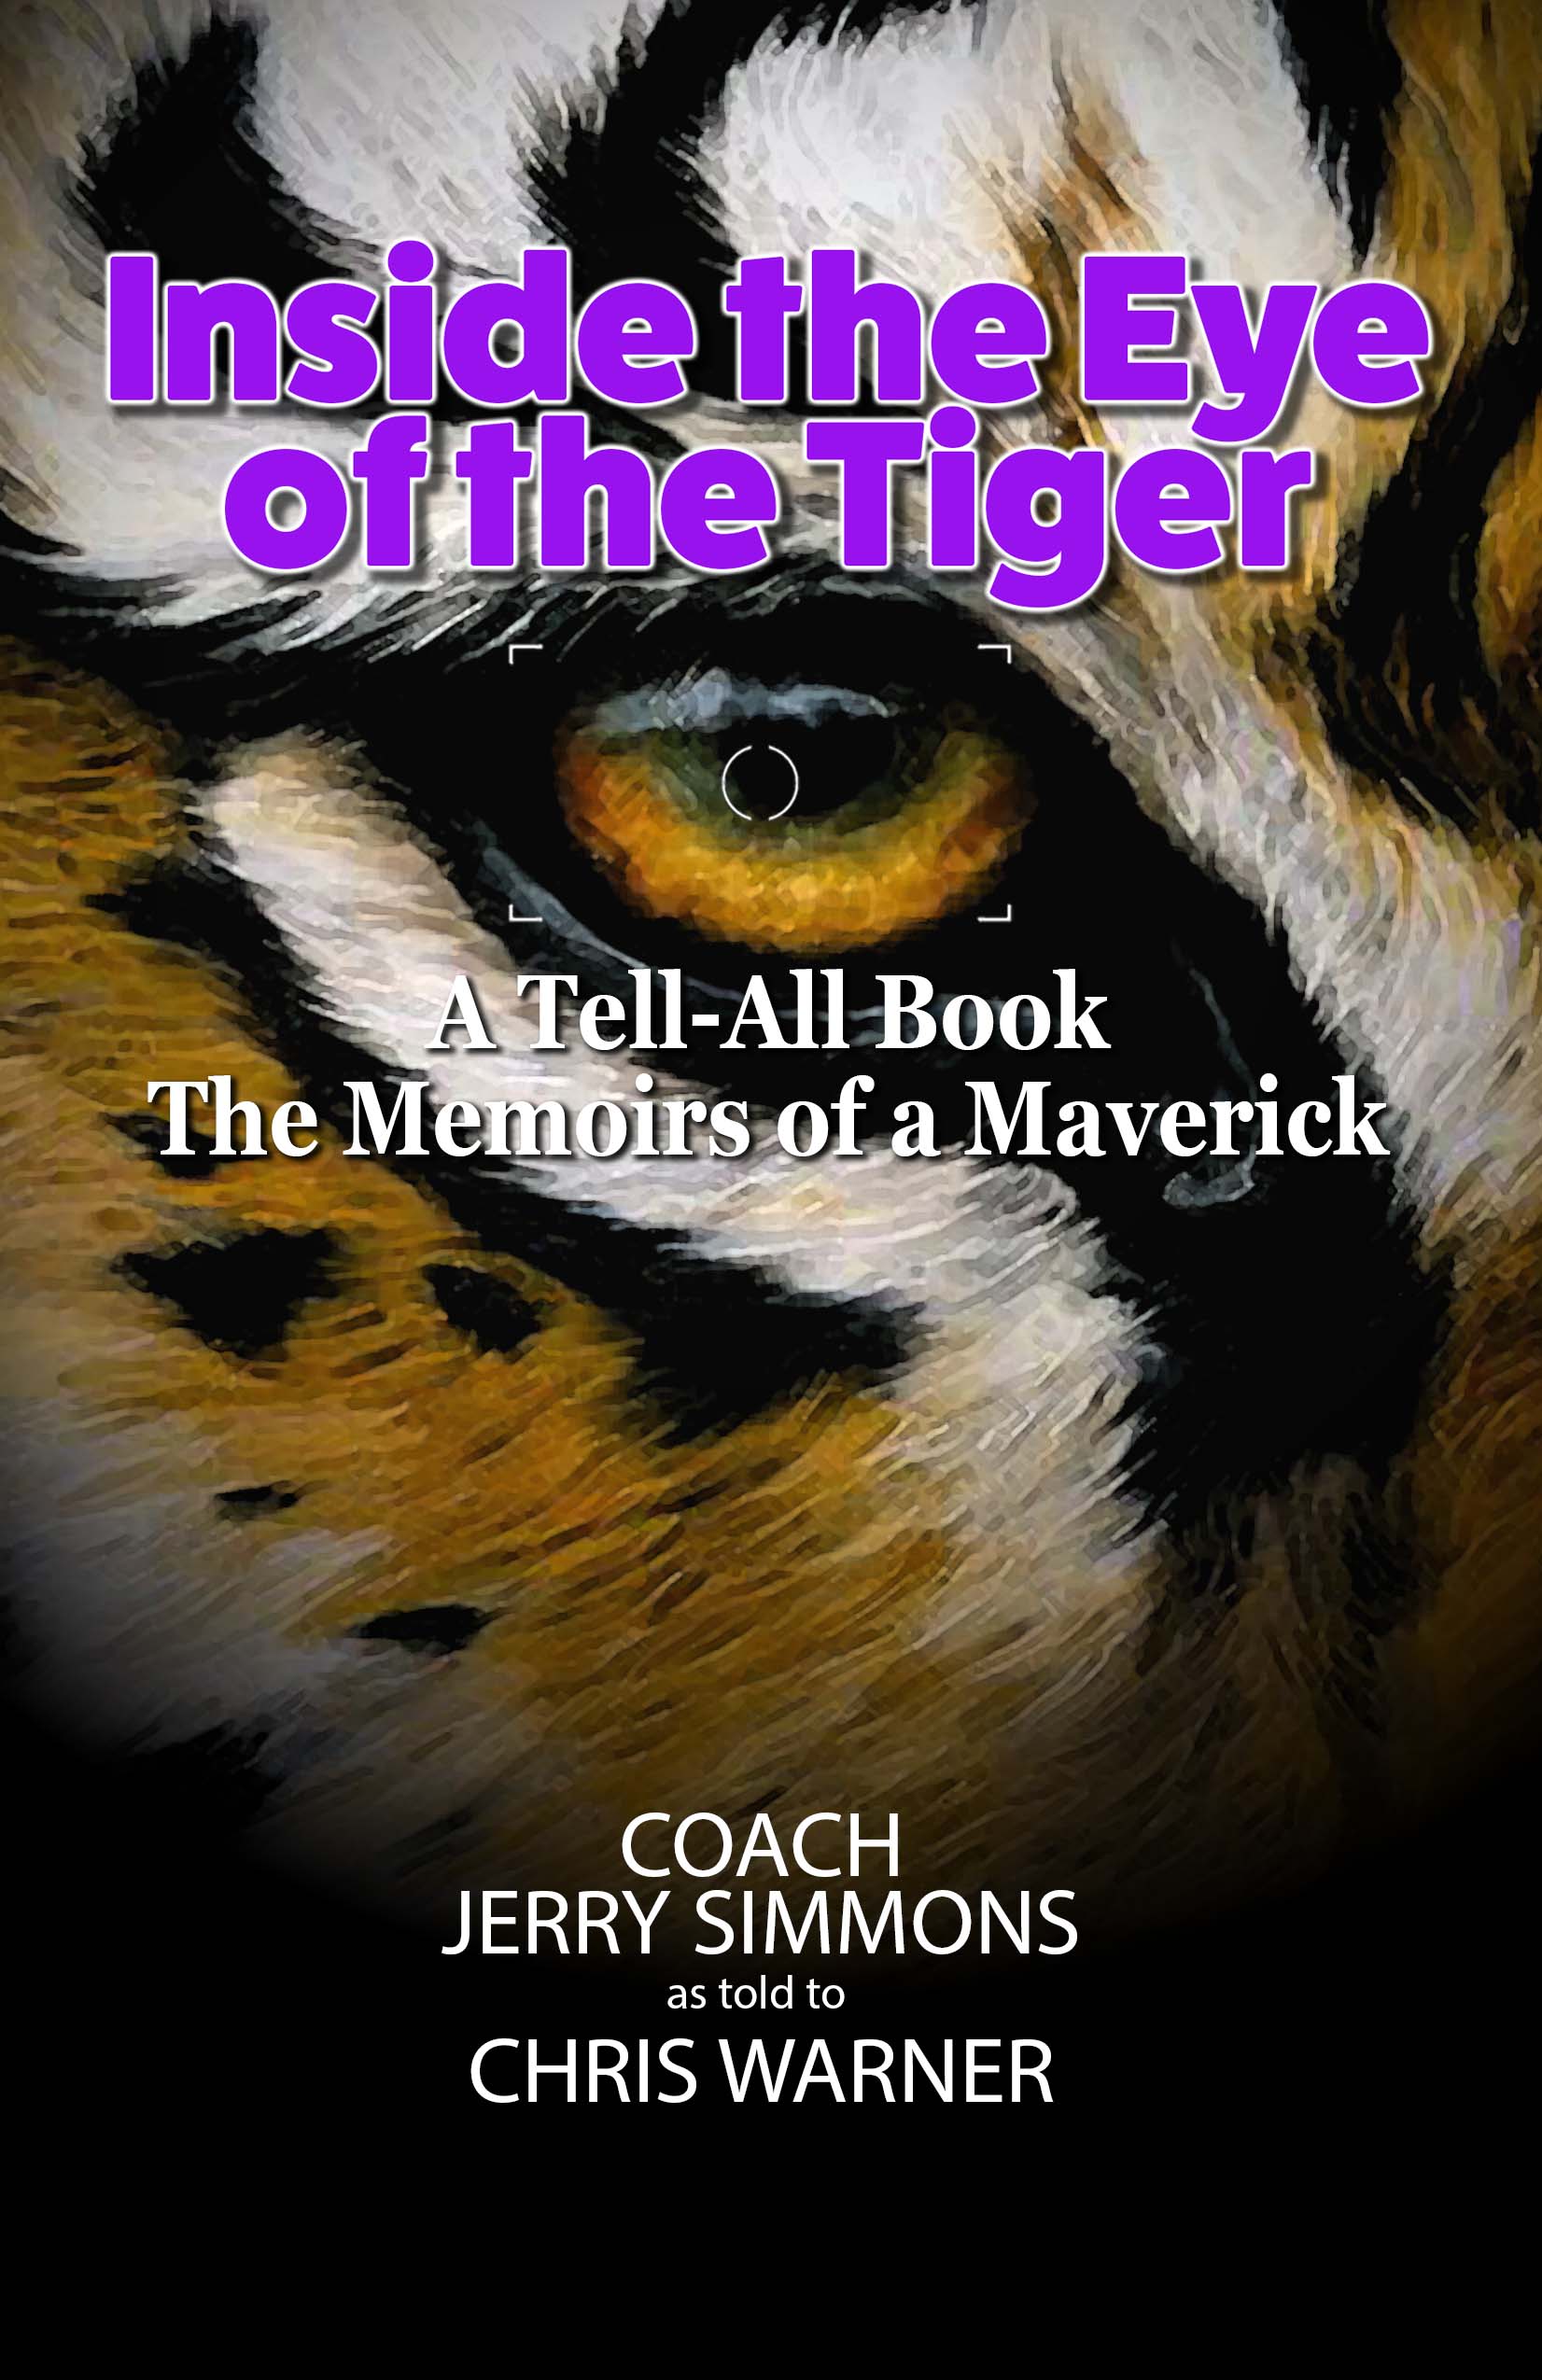 Chris Warner Releases Tell-All Book on LSU Athletic Department 1981-2003 (Coach Jerry Simmons)